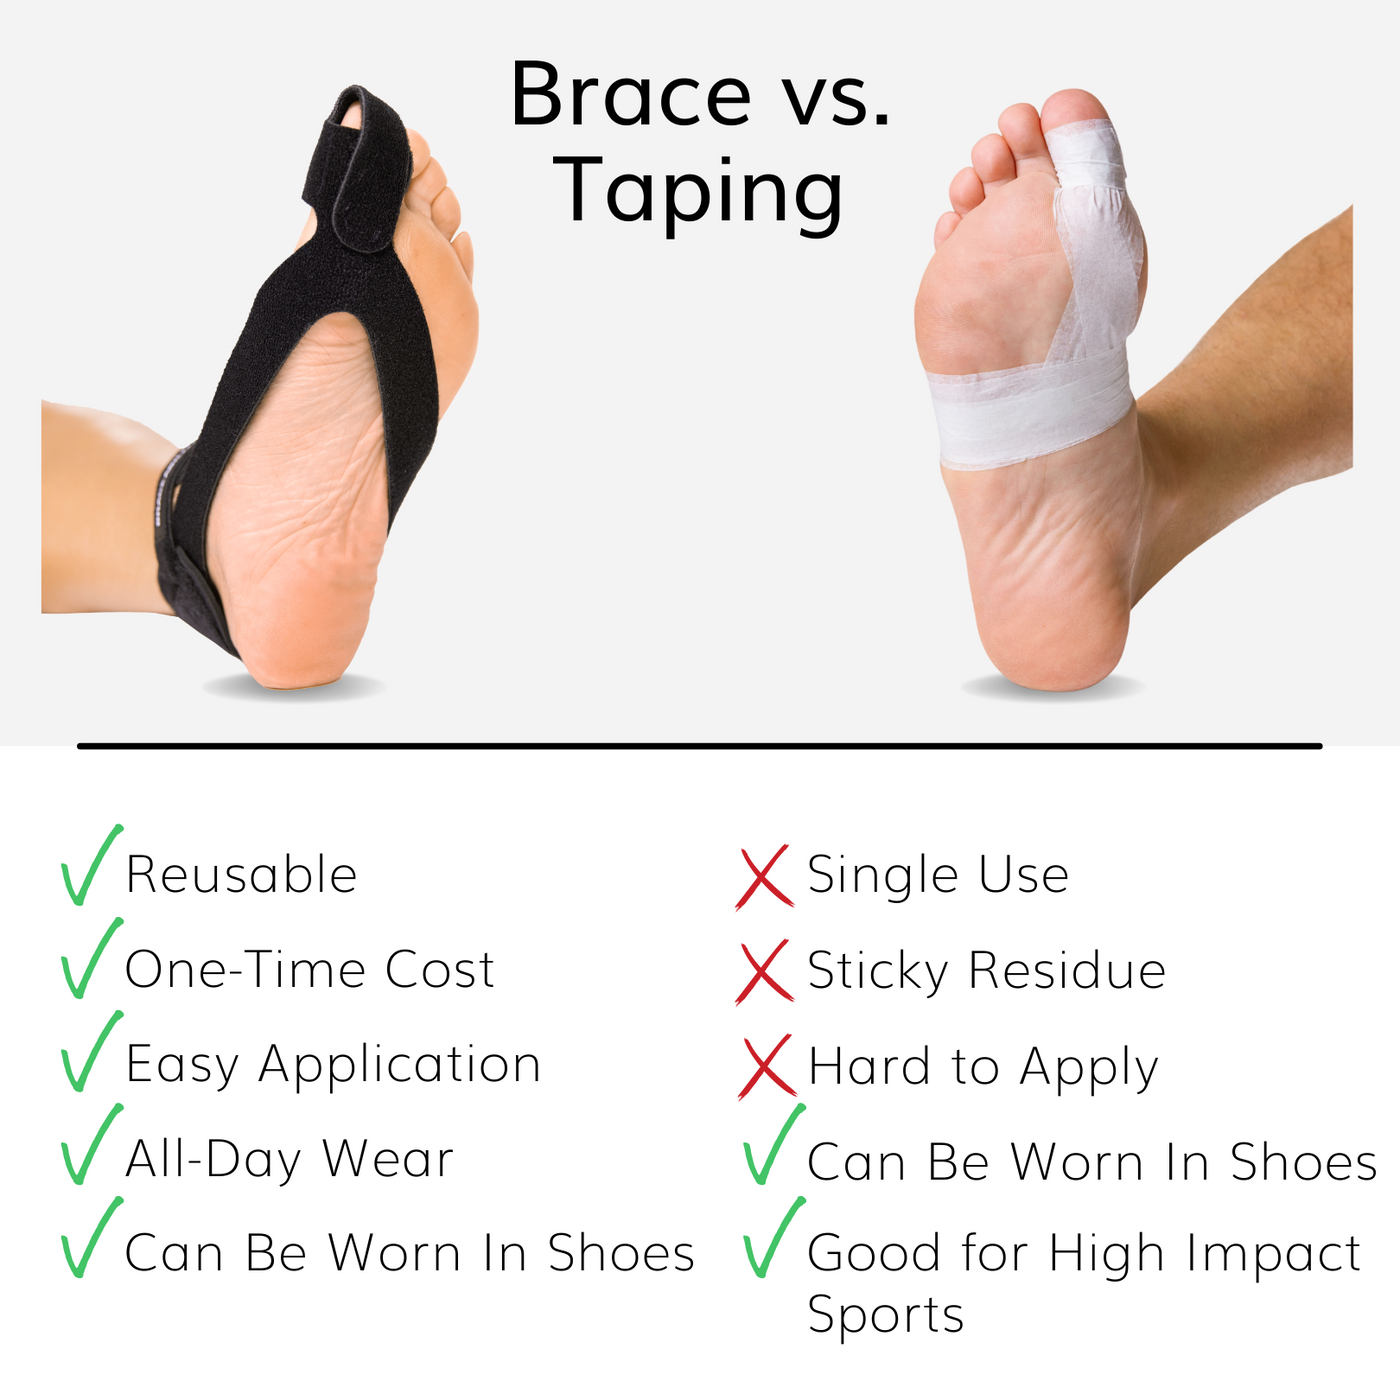 Using our turf toe treatment brace is a reusable, one time cost vs wrapping tape for turf toe